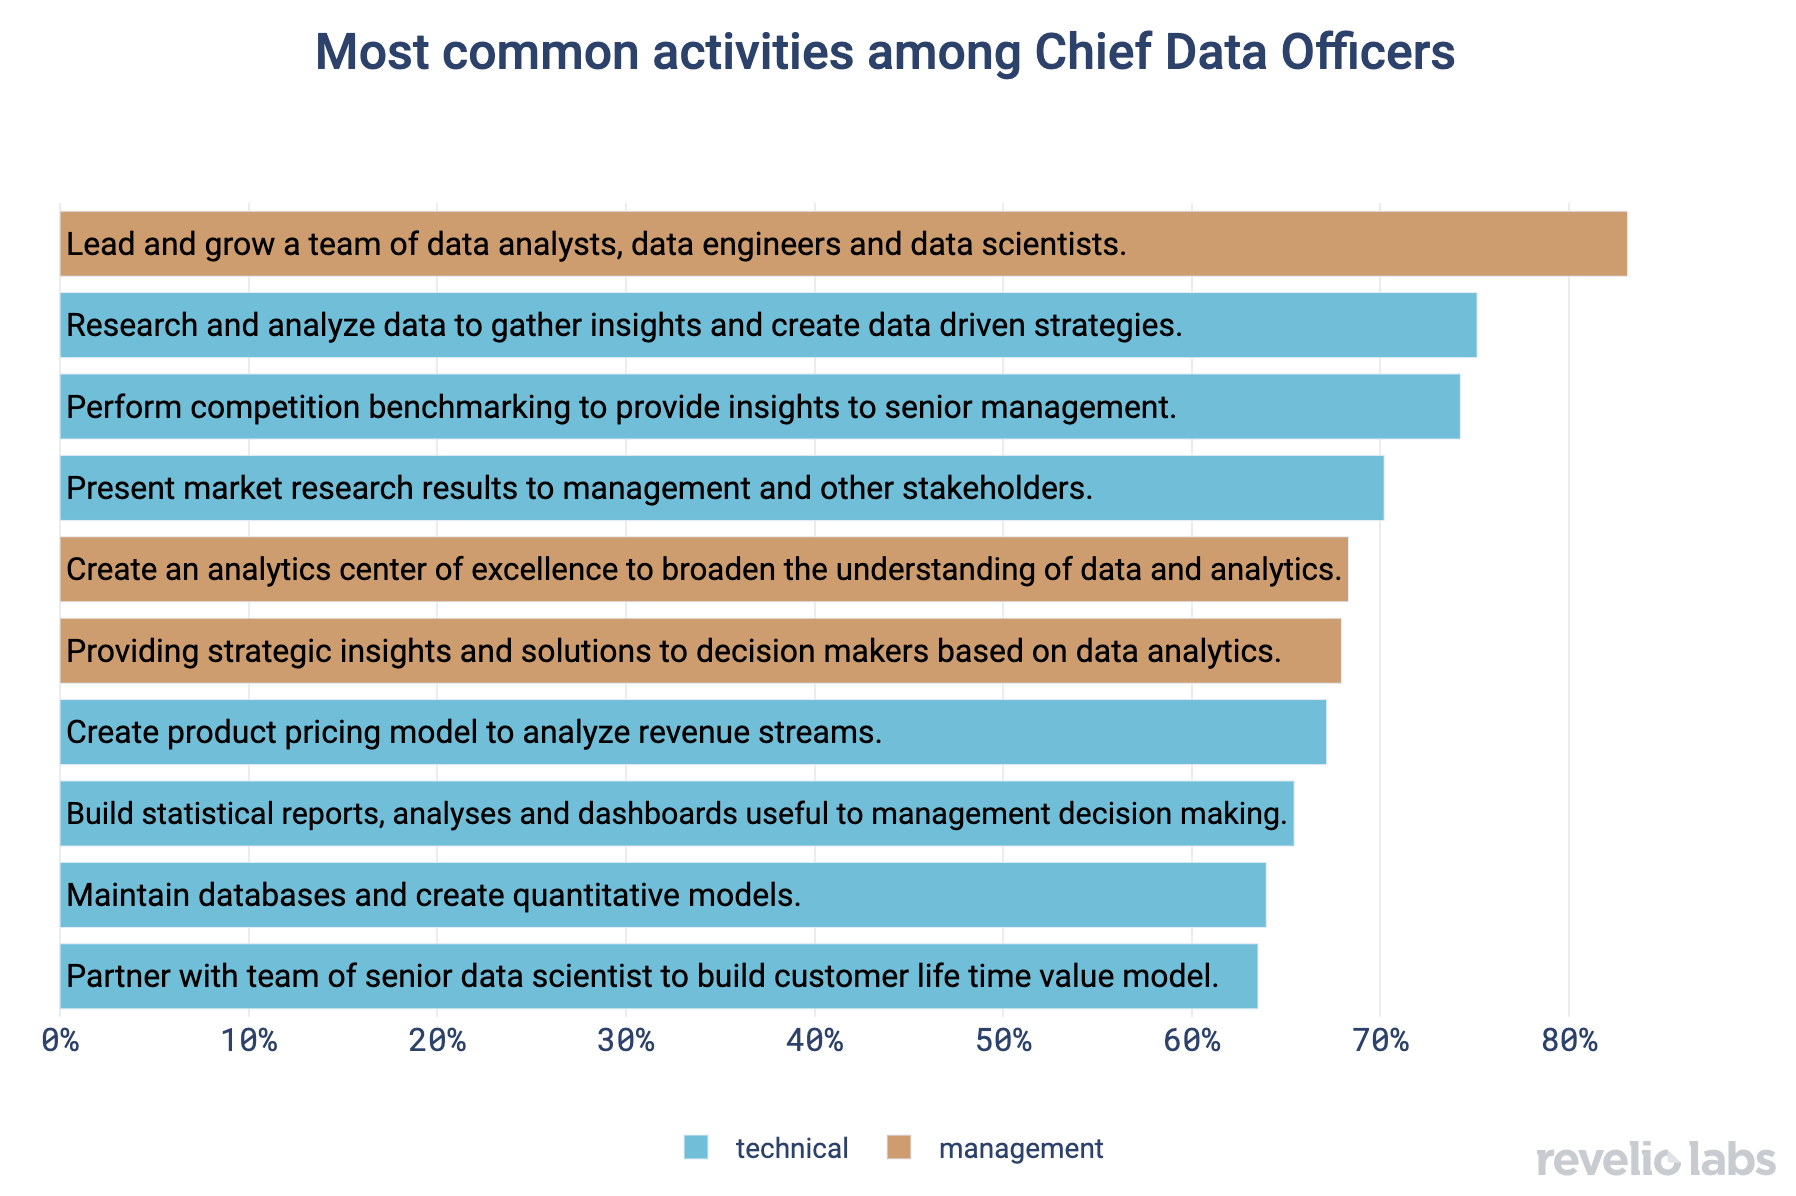 Most Common activities among Chief Data Officers